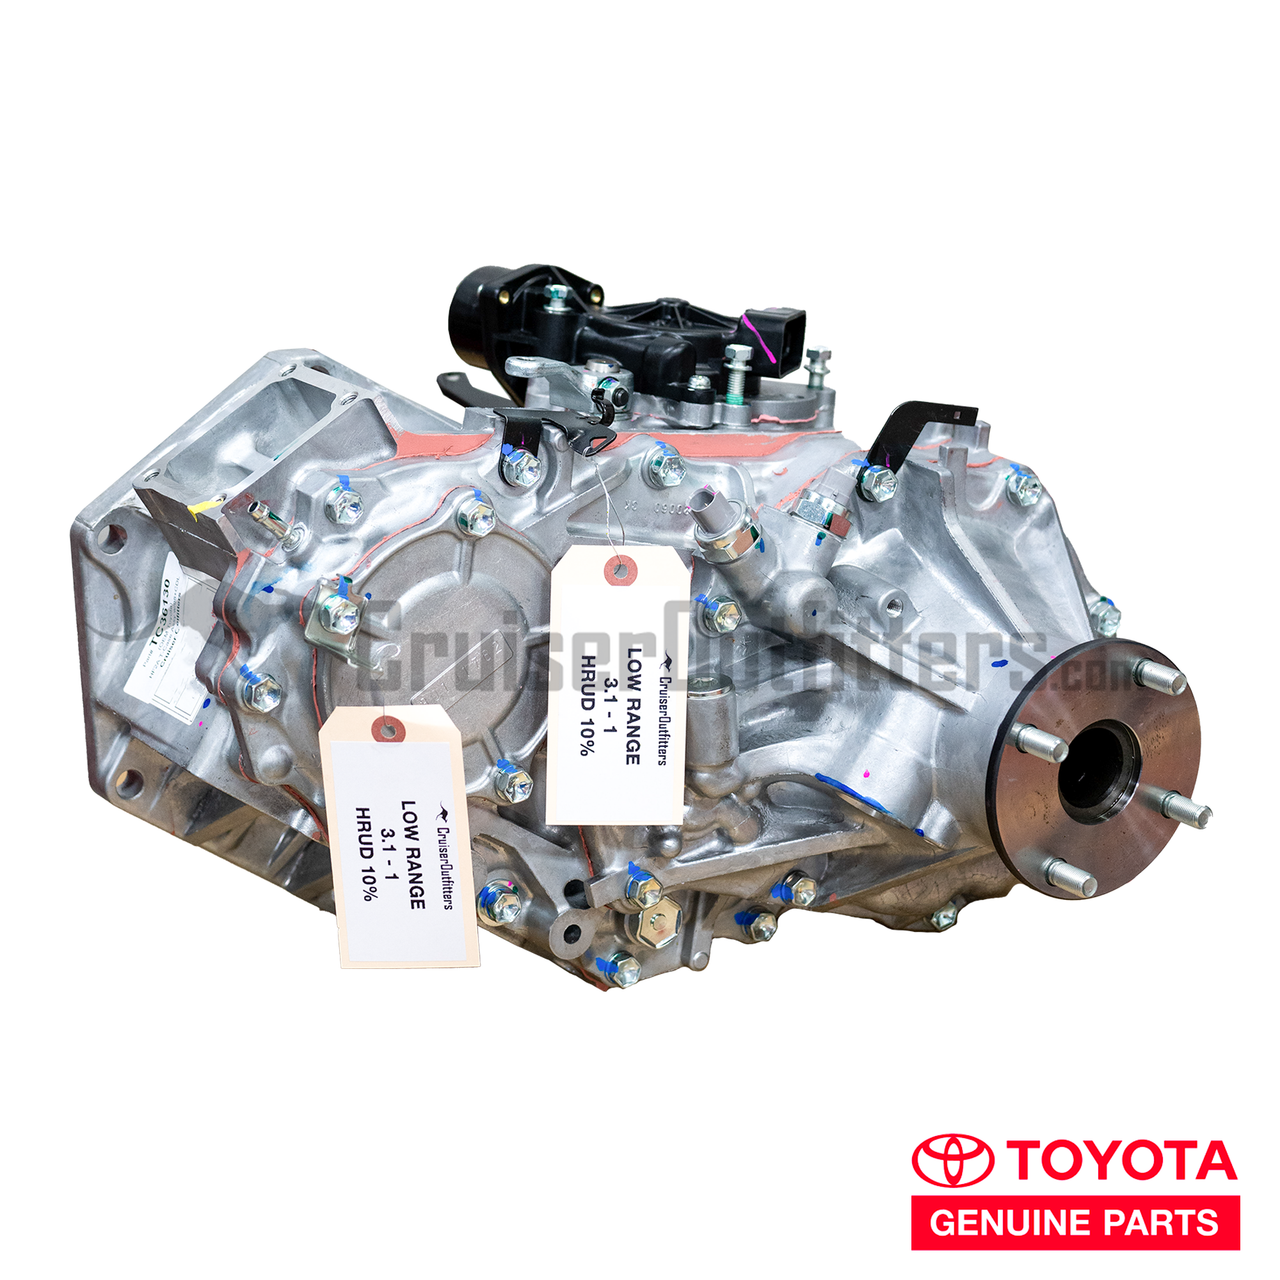 OEM HF2A Transfer Case Assembly - Fits 8x/450/100/470 Applications (See Fitment Details Below) (TC36130)